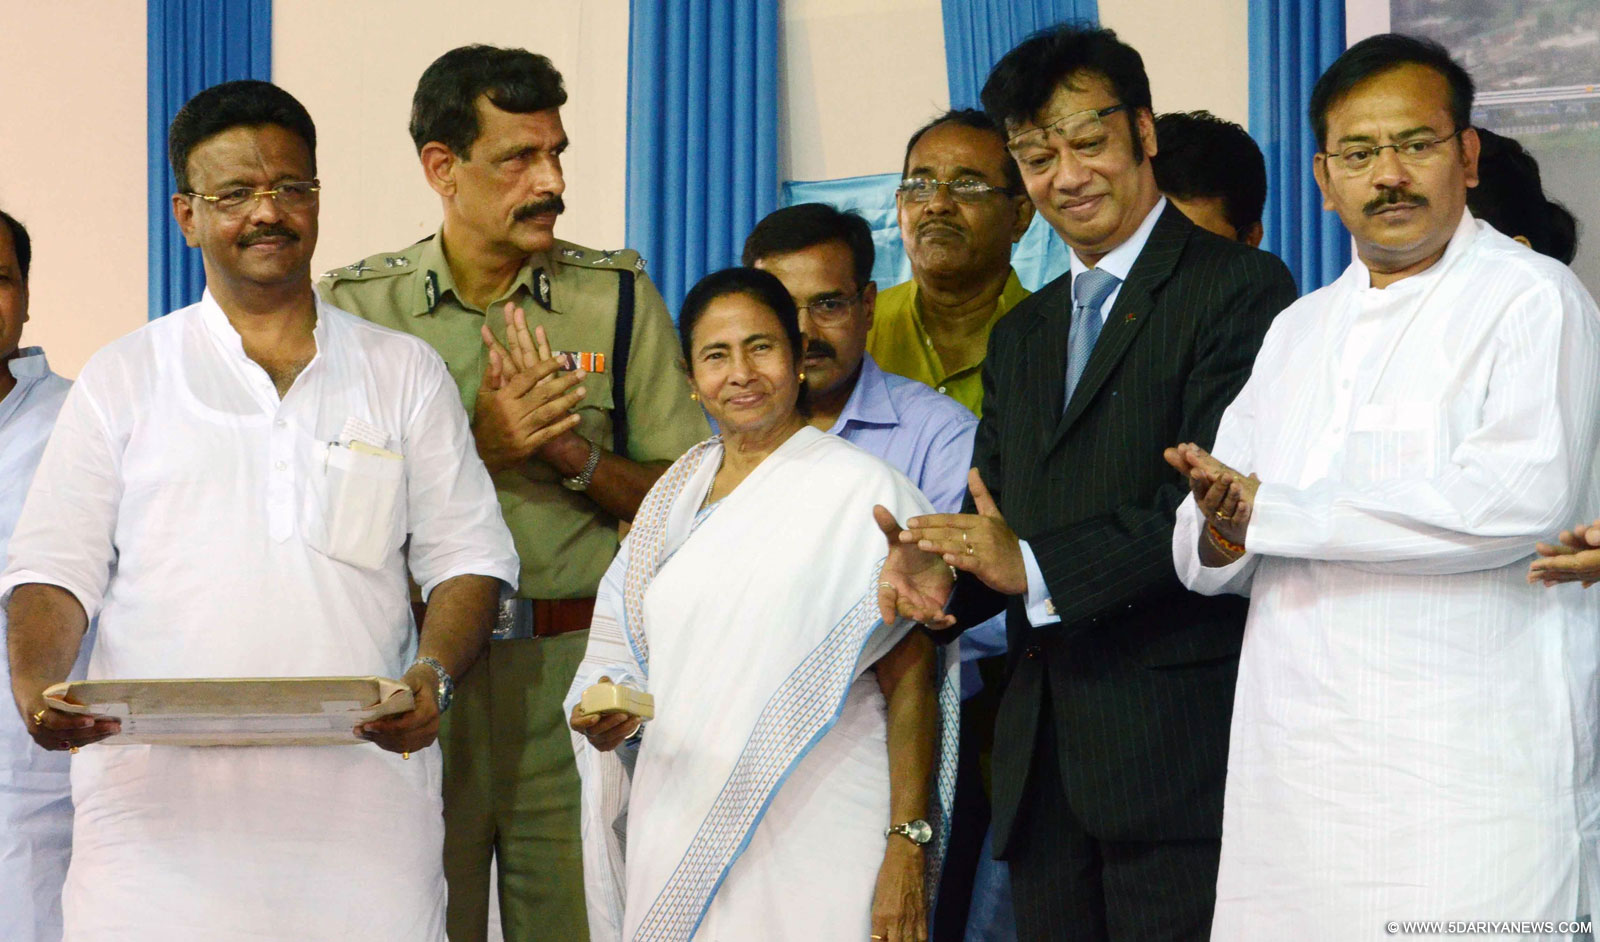 West Bengal Chief minister Mamata Banerjee during the inauguration of new Parama Flyover at EM Bypas in Kolkata on Oct 9, 2015. Also seen Kolkata Commissioner of Police Surajit Kar Purkayastha with others minister and official. 